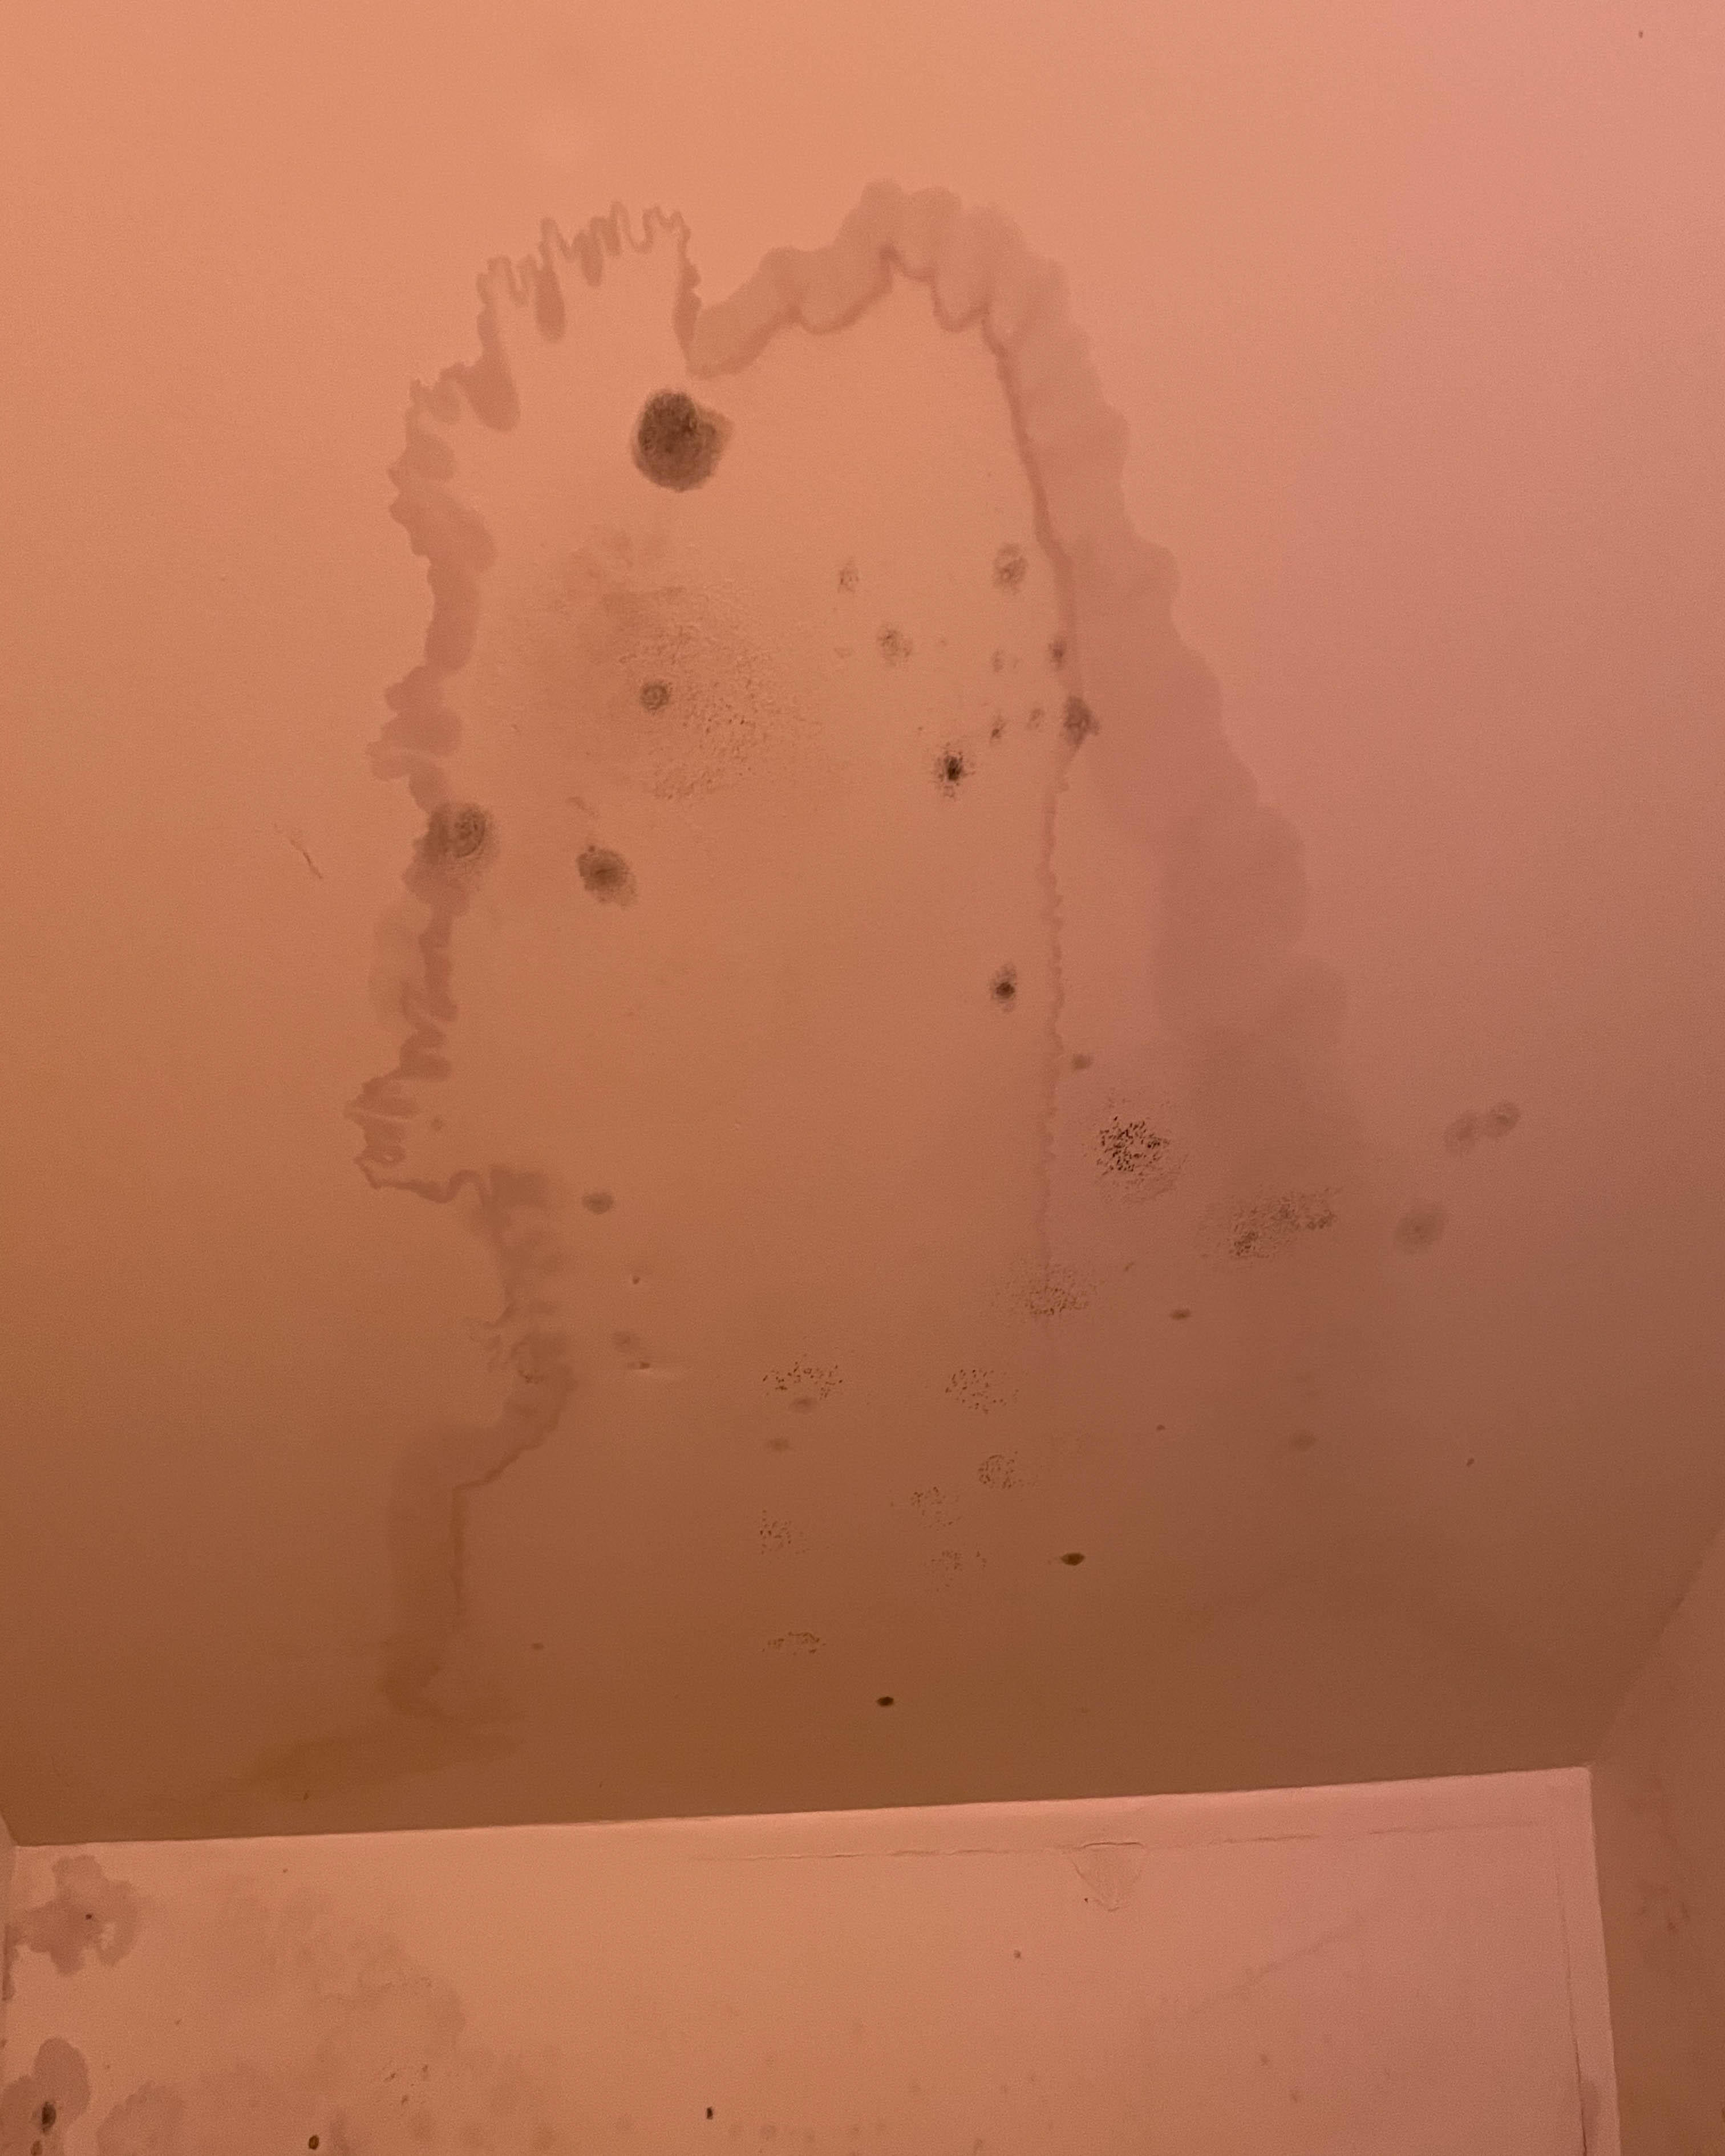 Mold is more likely to grow in unexpected places after water damage. If you ignore the mold, it may spread and continue to grow. SERVPRO of West Knoxville is your best choice for all of your mold cleanup and remediation needs in Ebenezer, TN. Give us a call today!